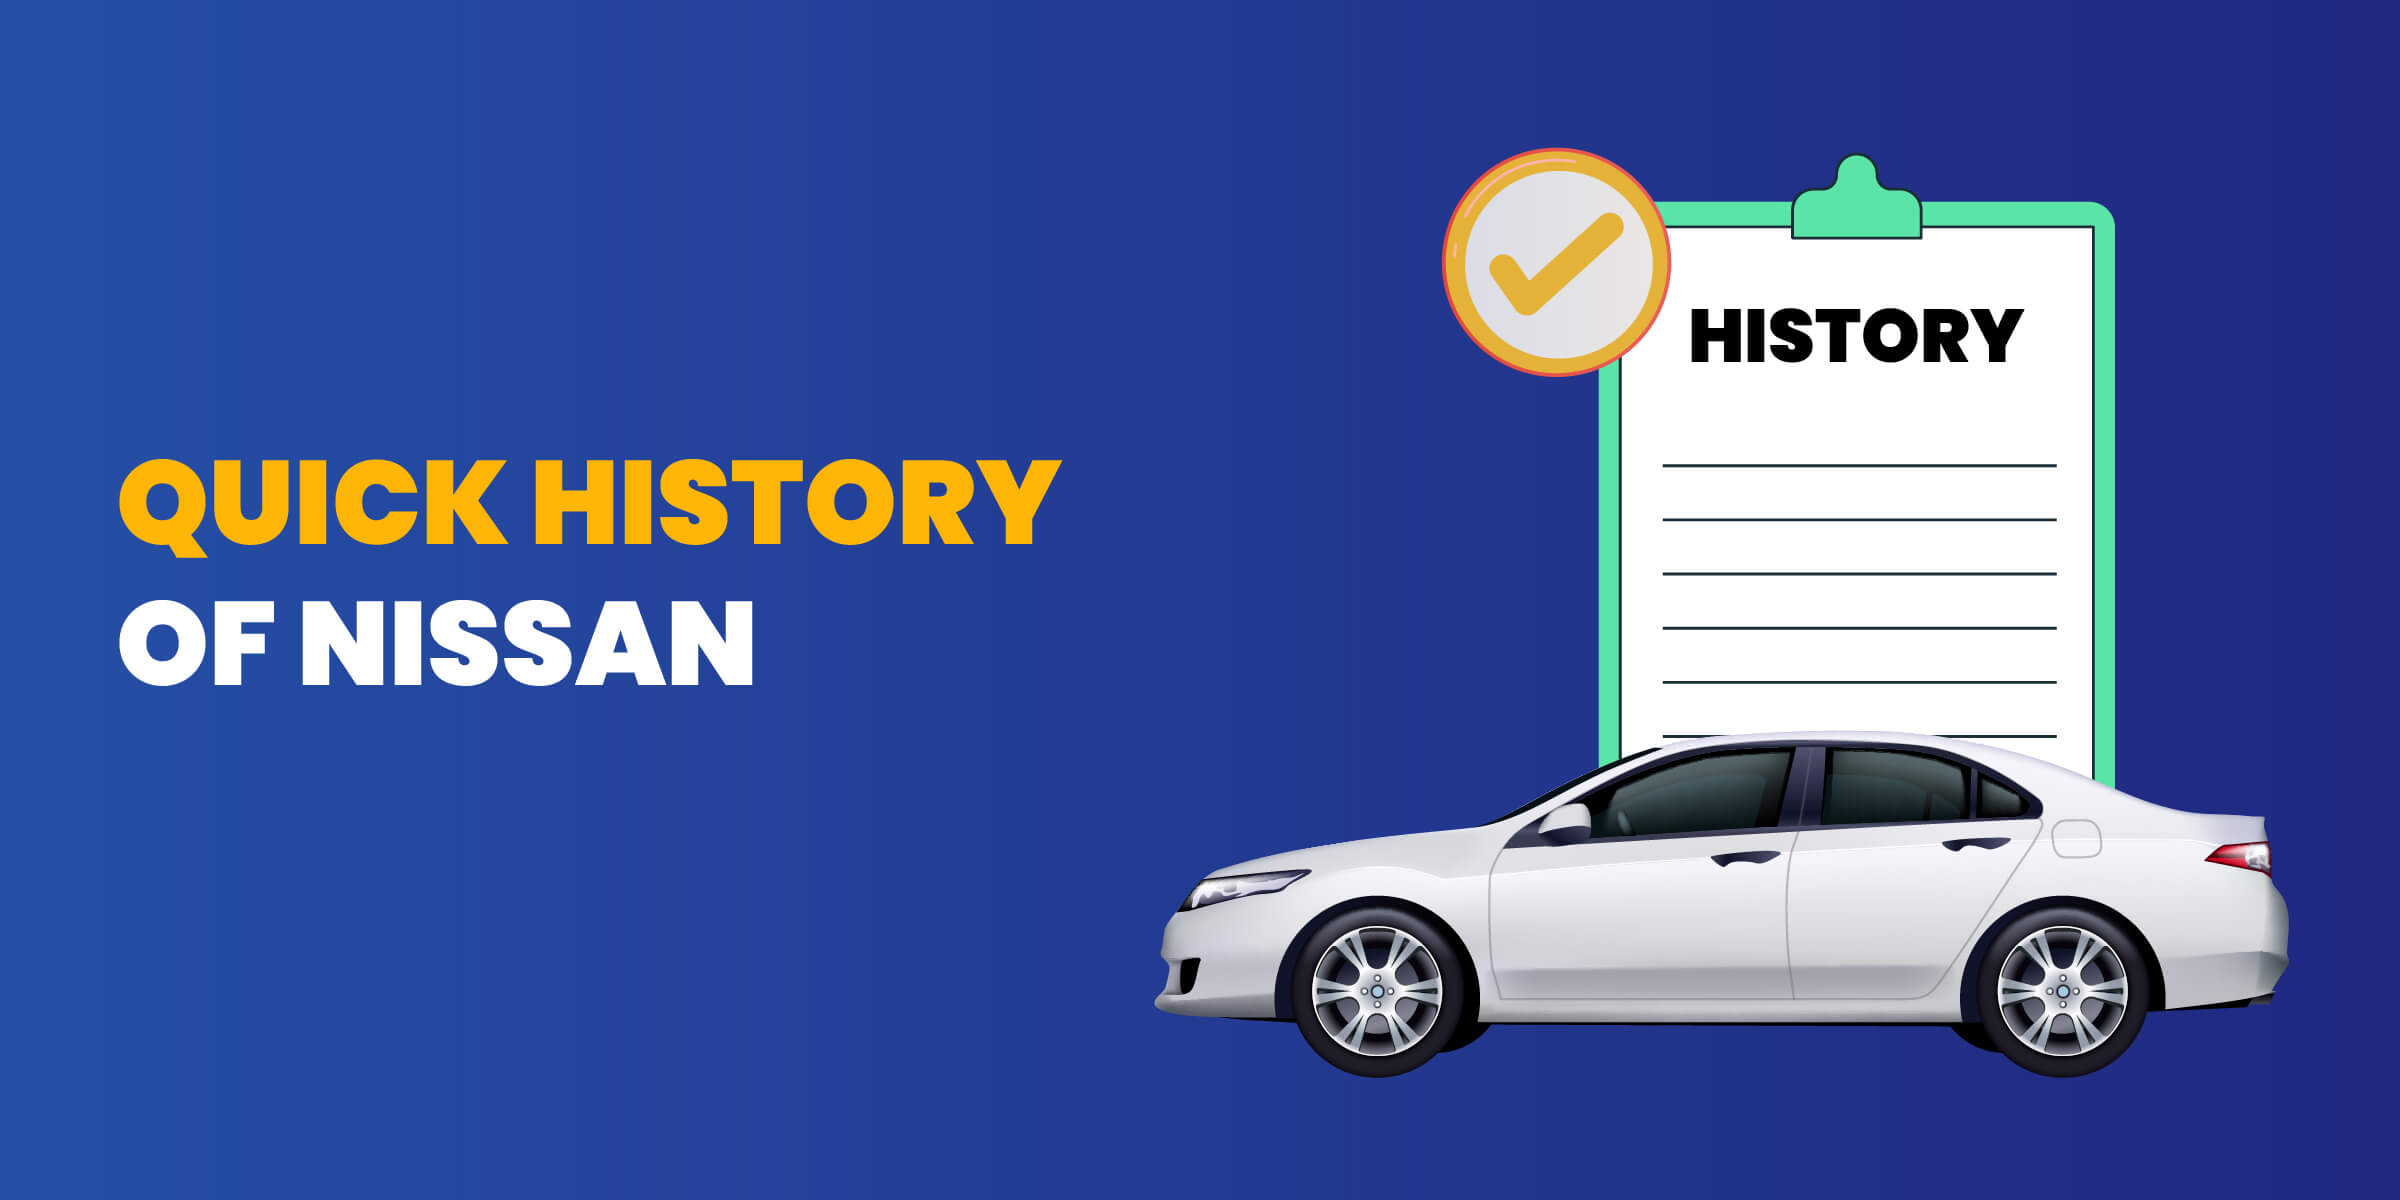 Quick History of Nissan